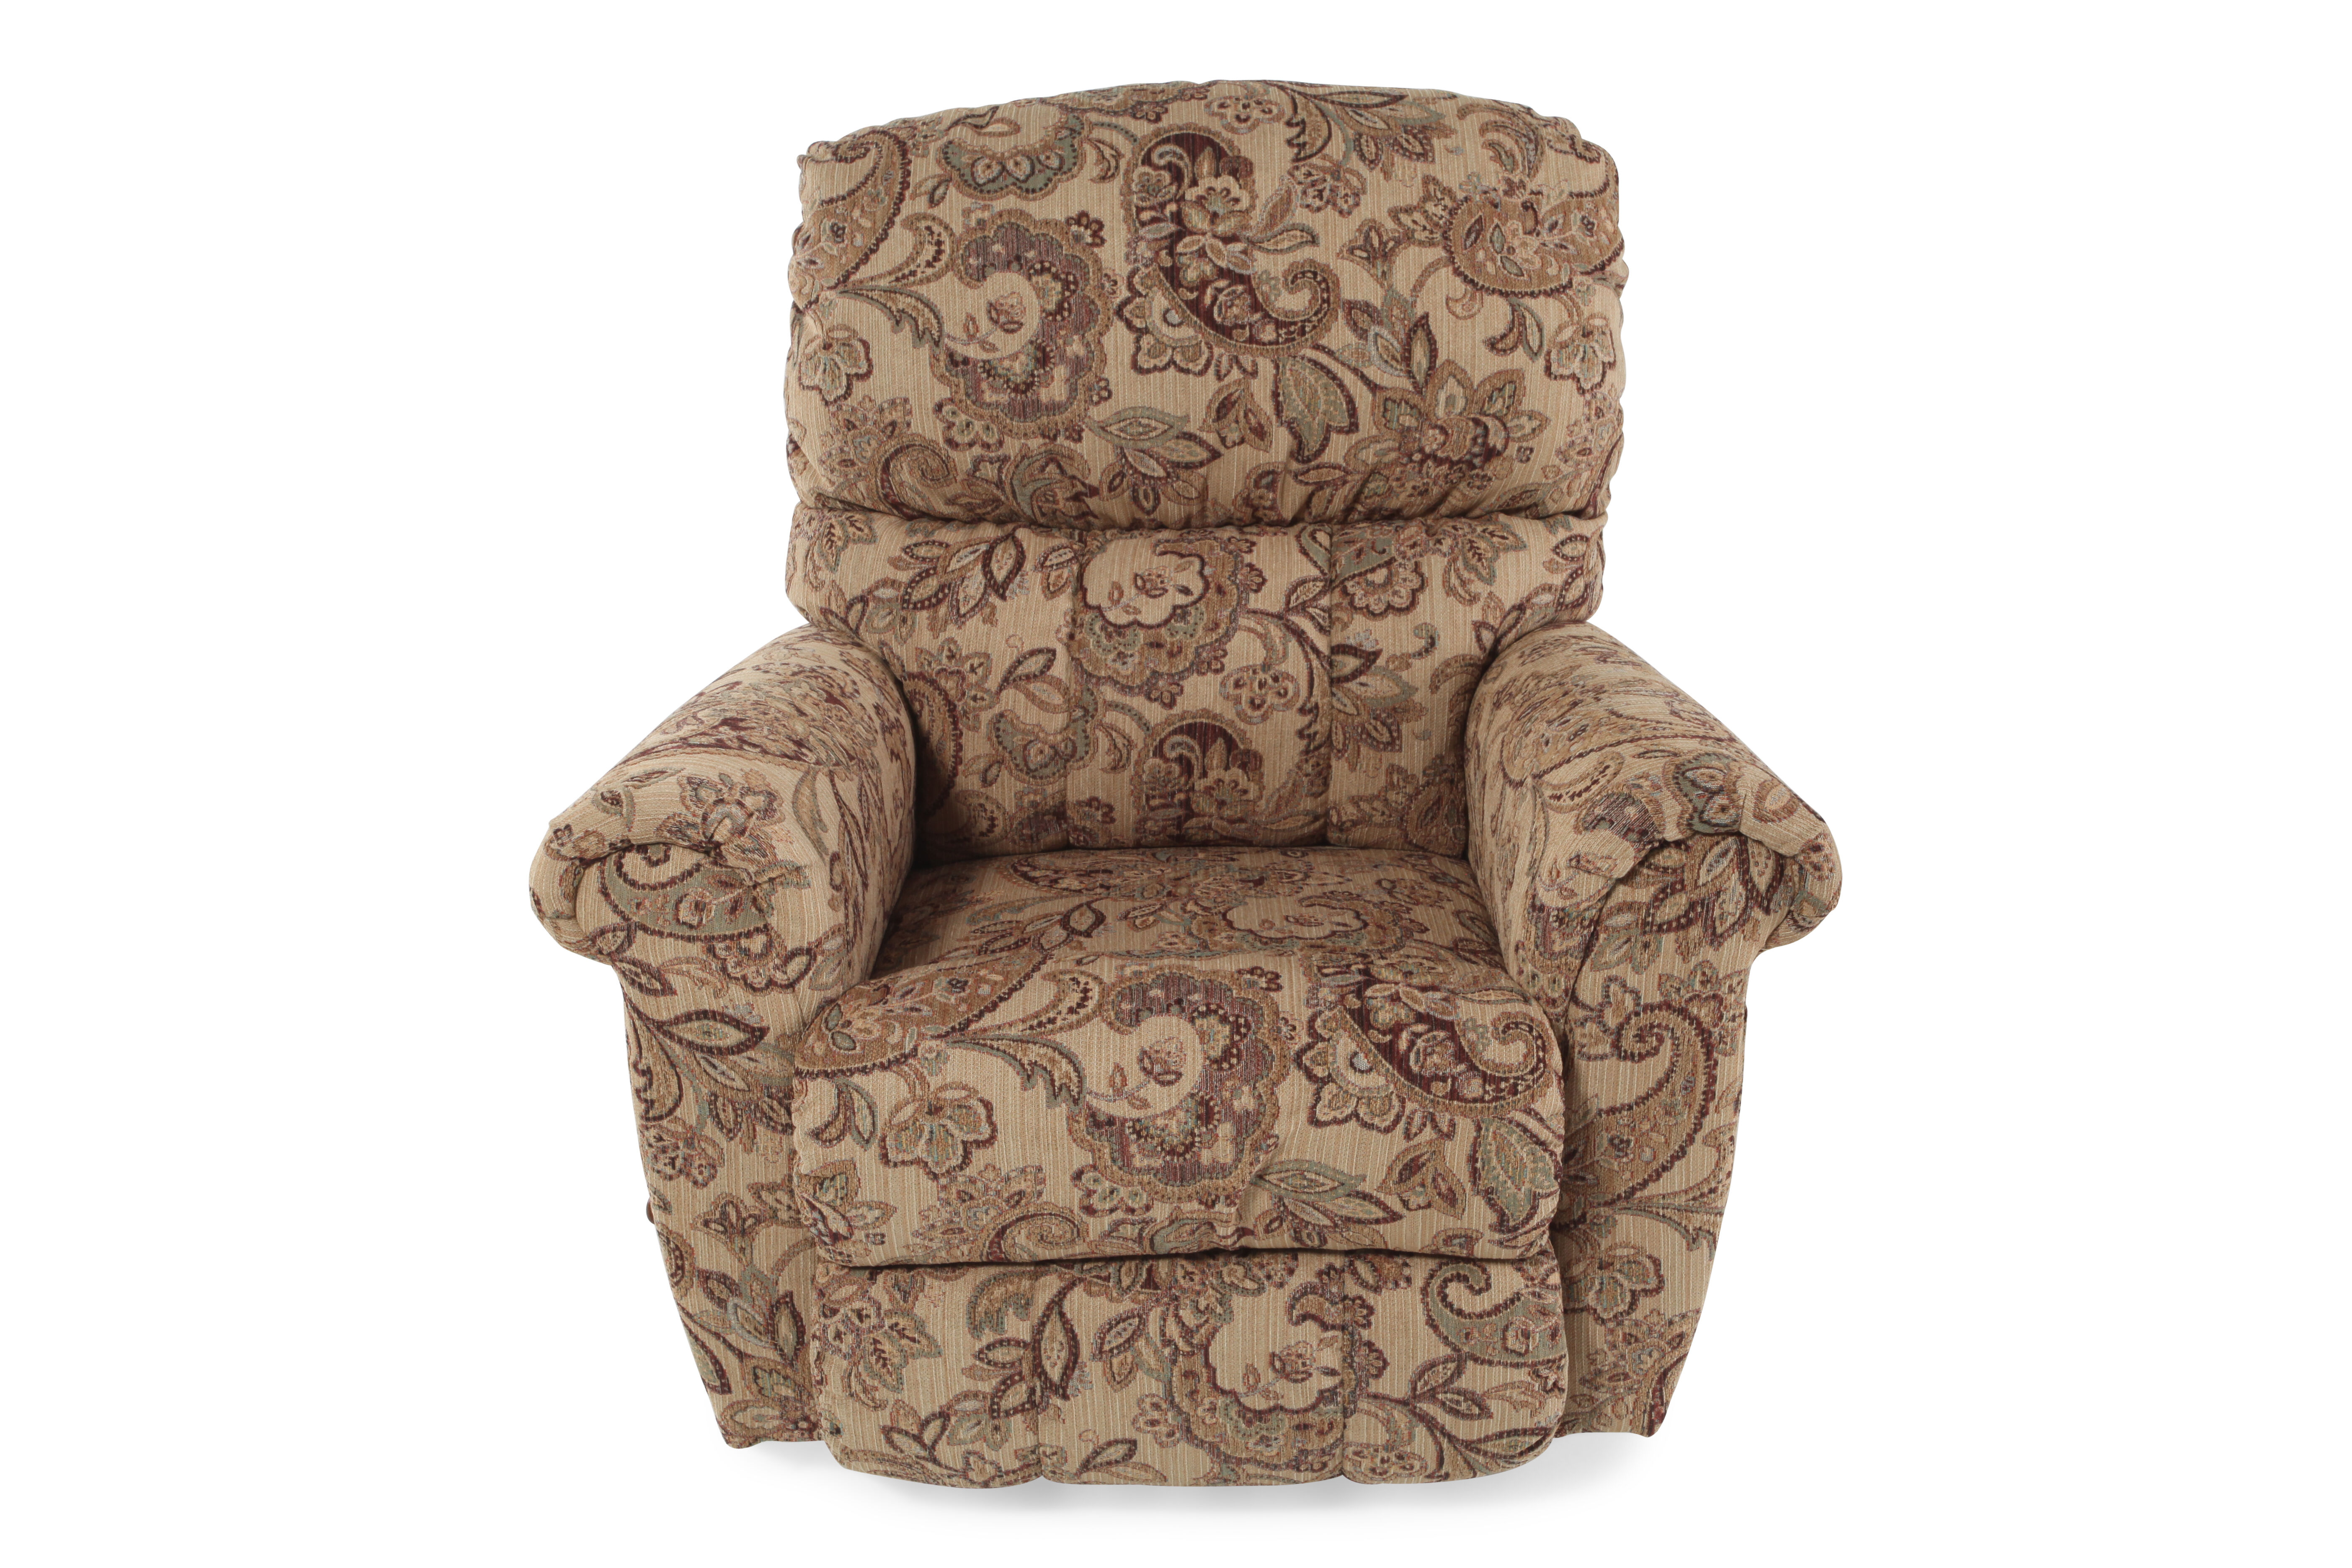 mathis brothers lazy boy recliners